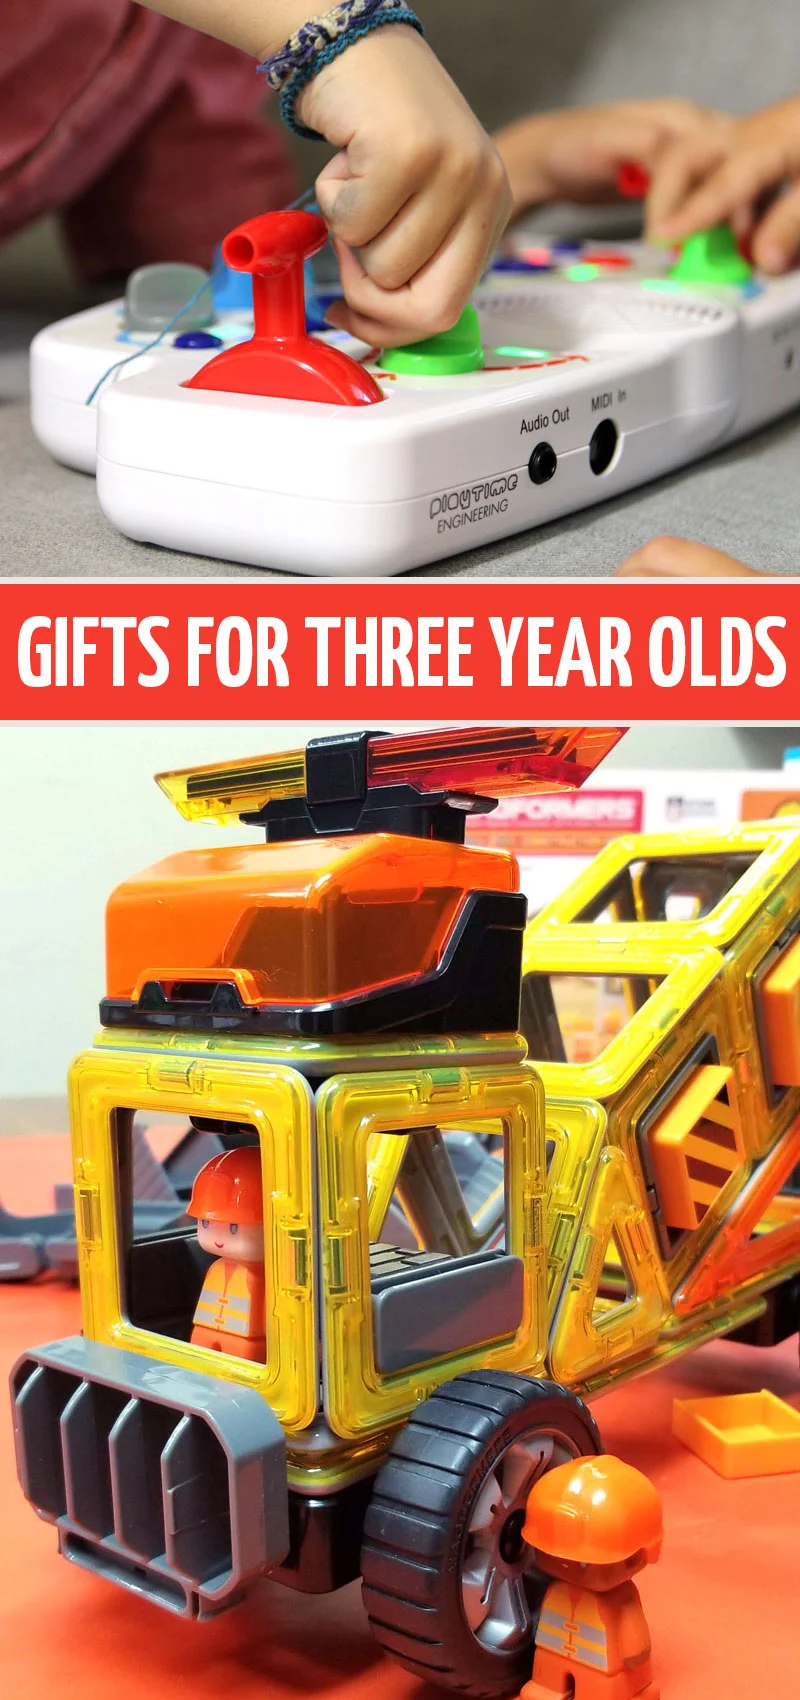 These are our favorite gifts for three year olds! These fun toys and games are perfect for birthday gifts for 3 year old boys or holiday gifts for older toddler boy sand girls!